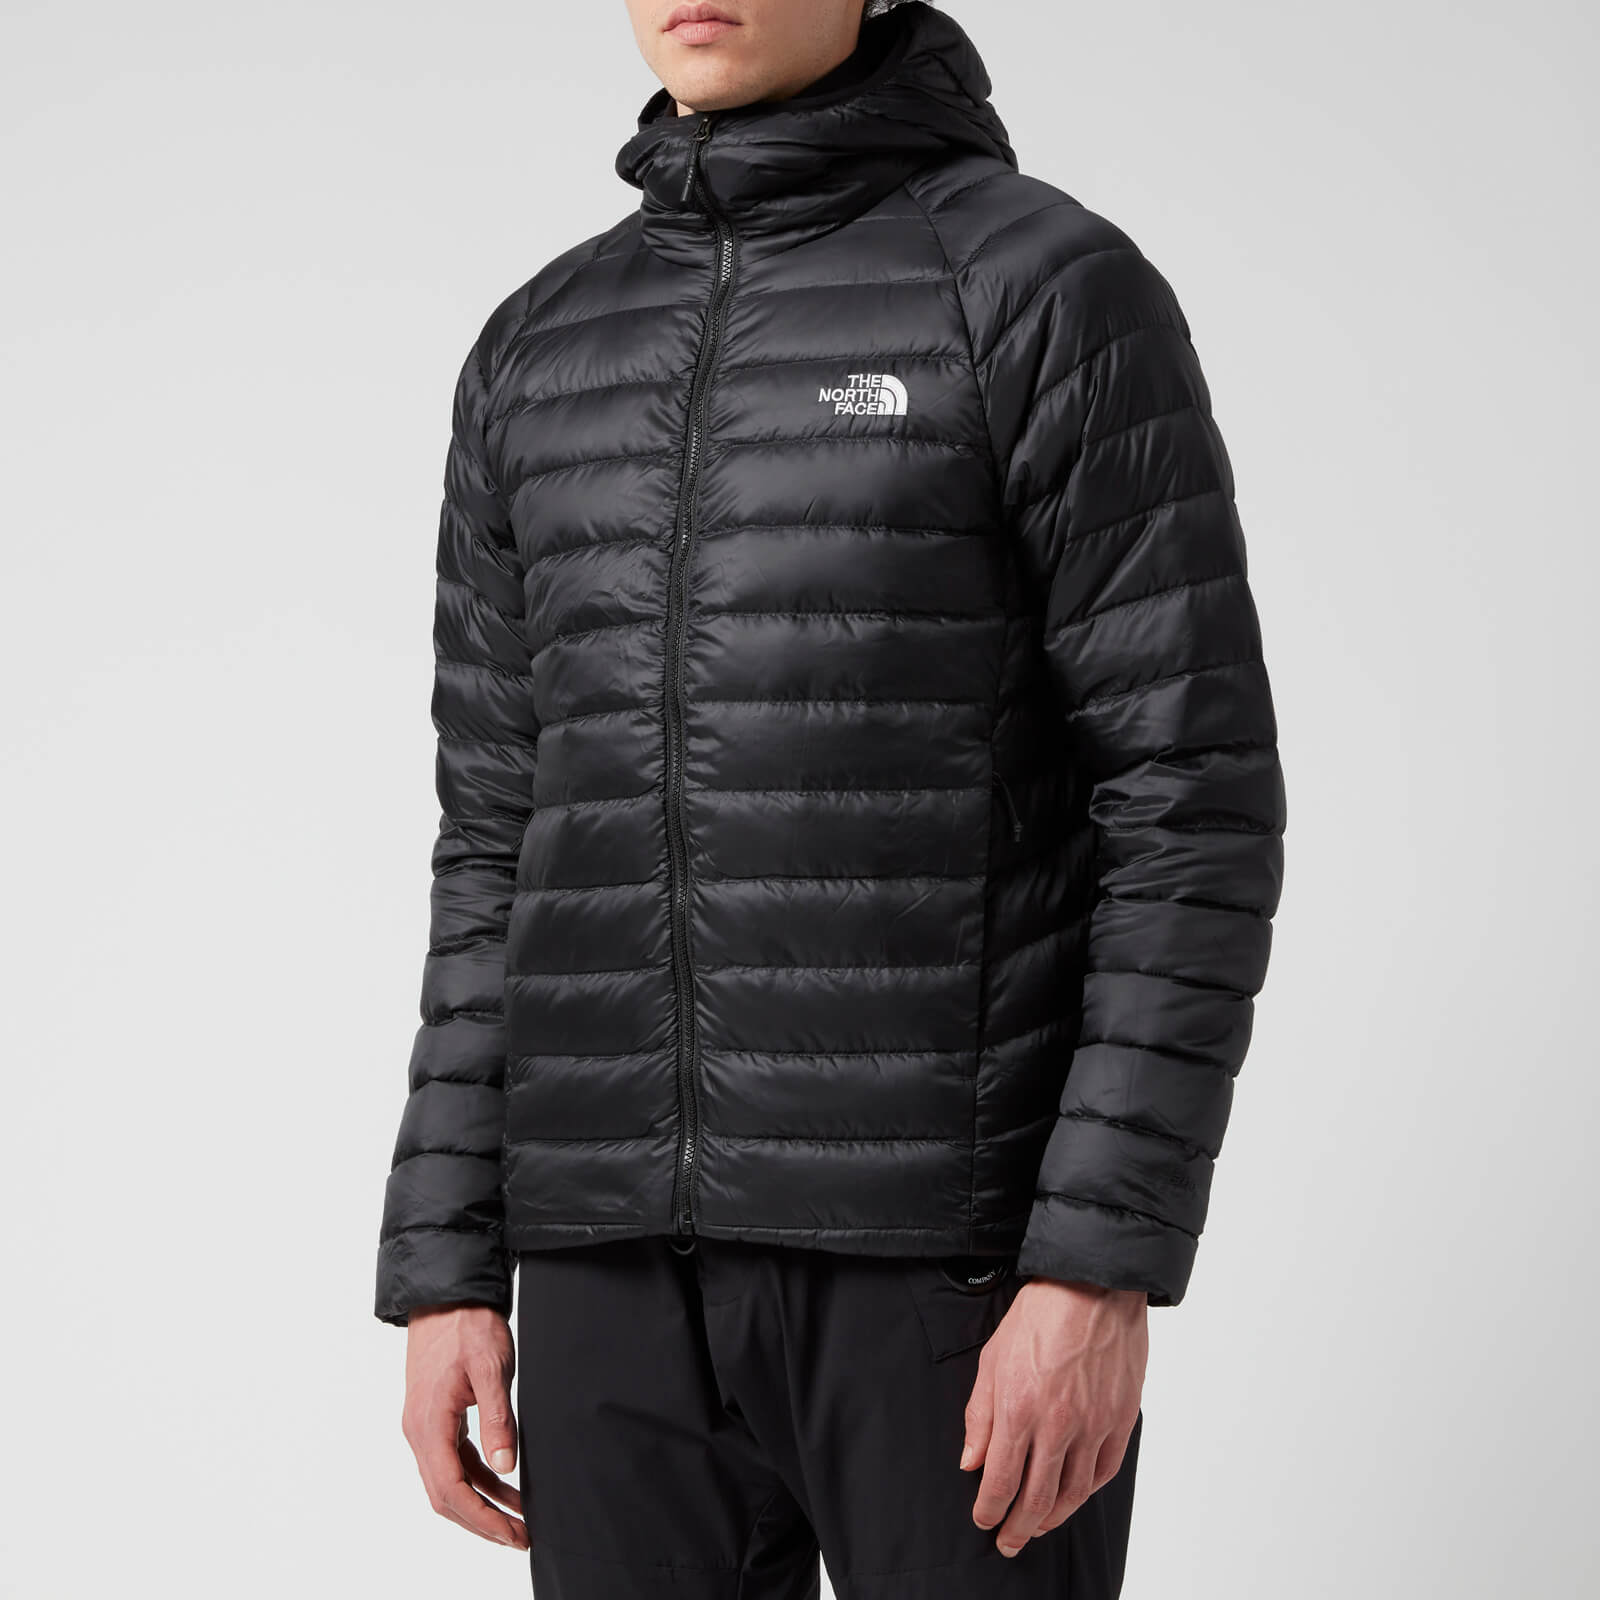 The North Face Men's Trevail Hooded Jacket - Tnf Black - L